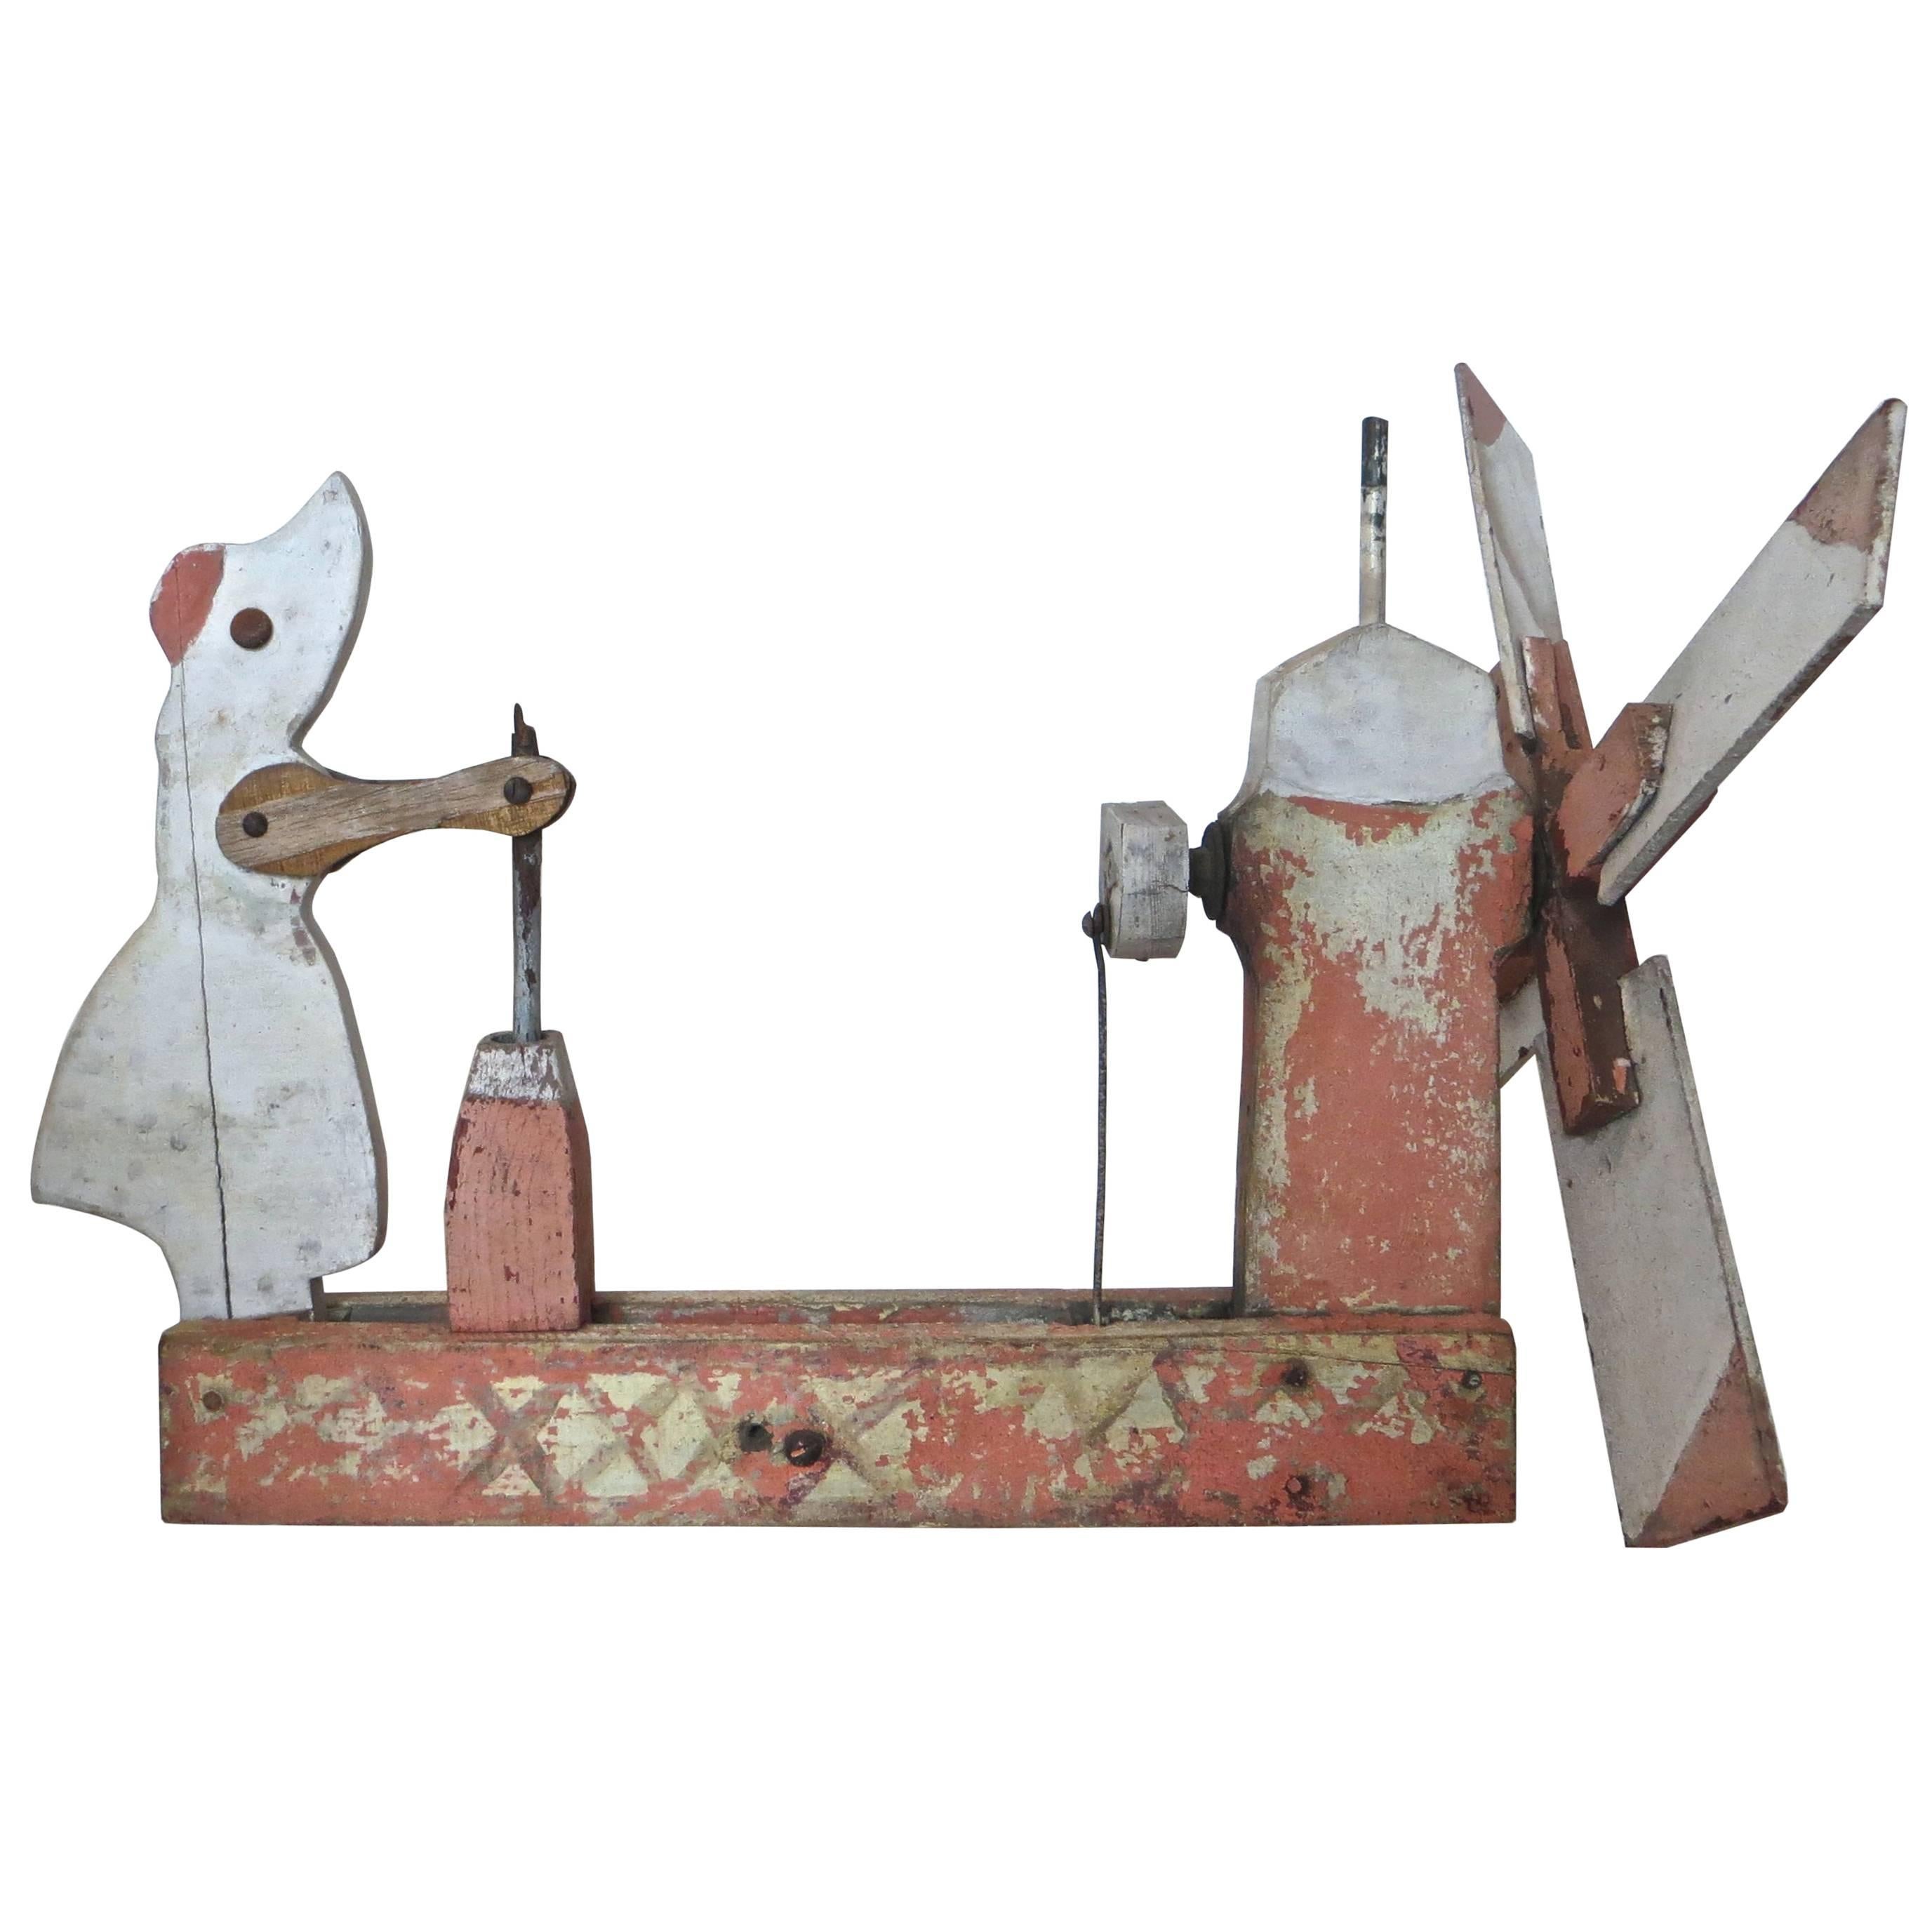 Whirligig Depicts Woman Churning Butter, American, circa 1940